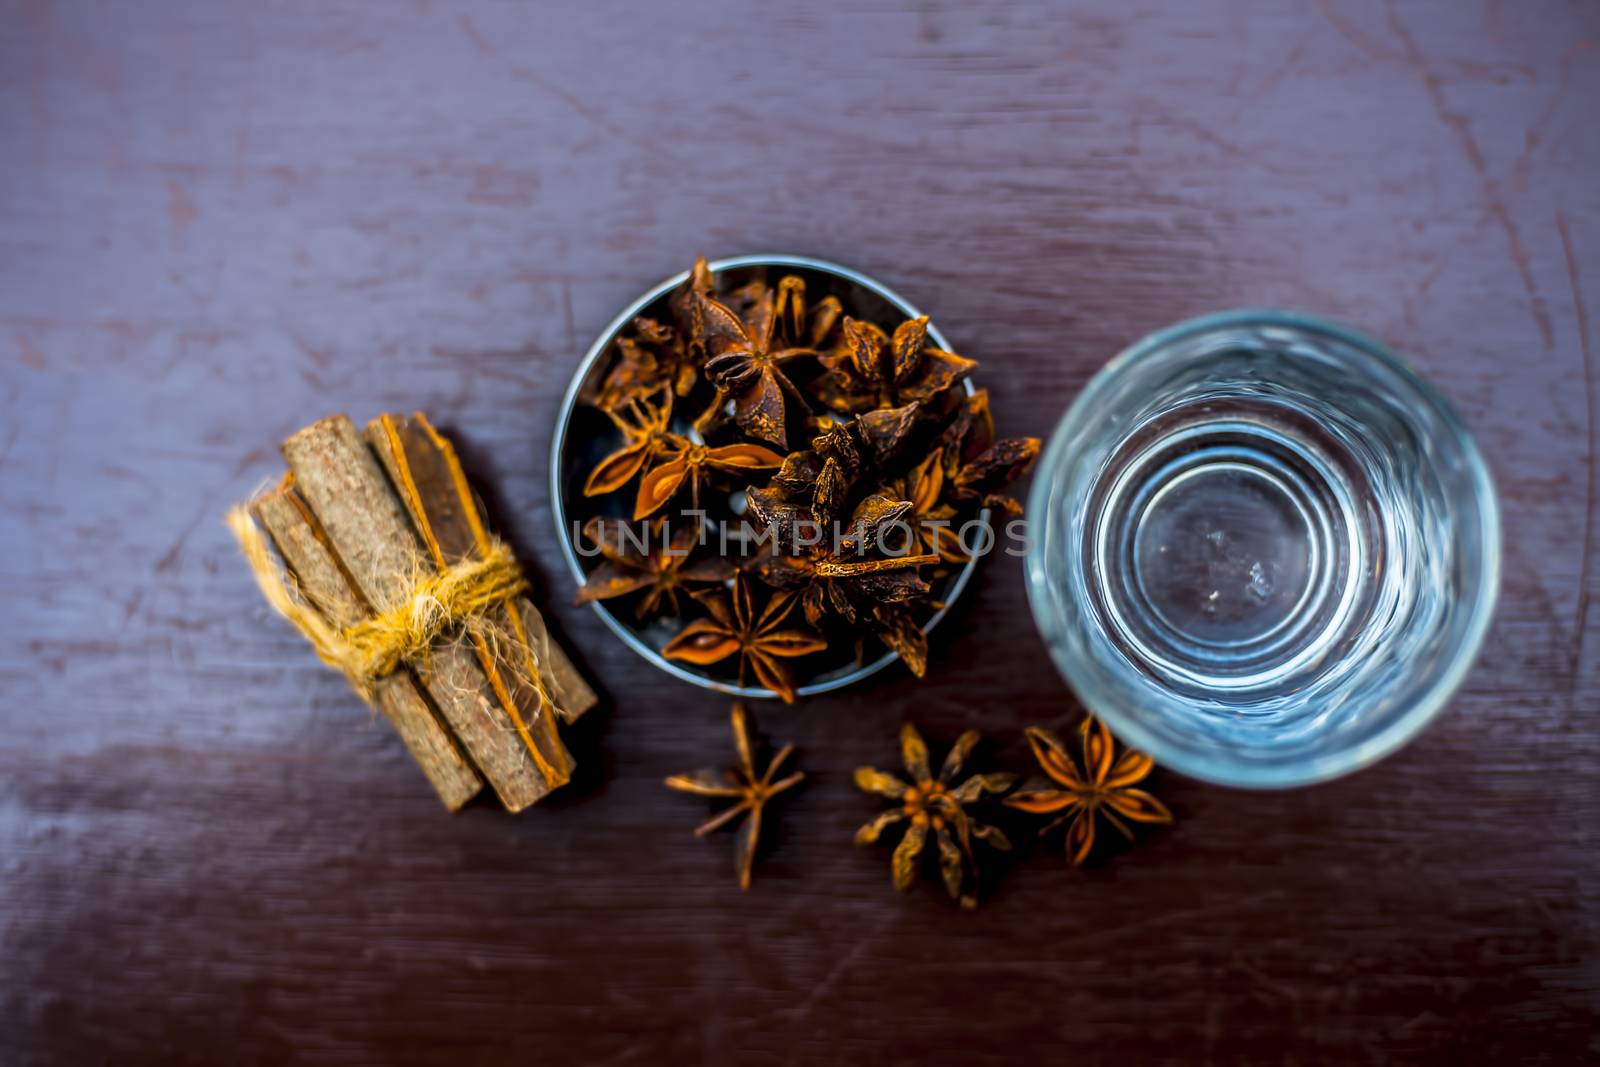 Face mask for wrinkles on the wooden surface consisting of some cinnamon sticks, water, and star anise seed powder. by mirzamlk